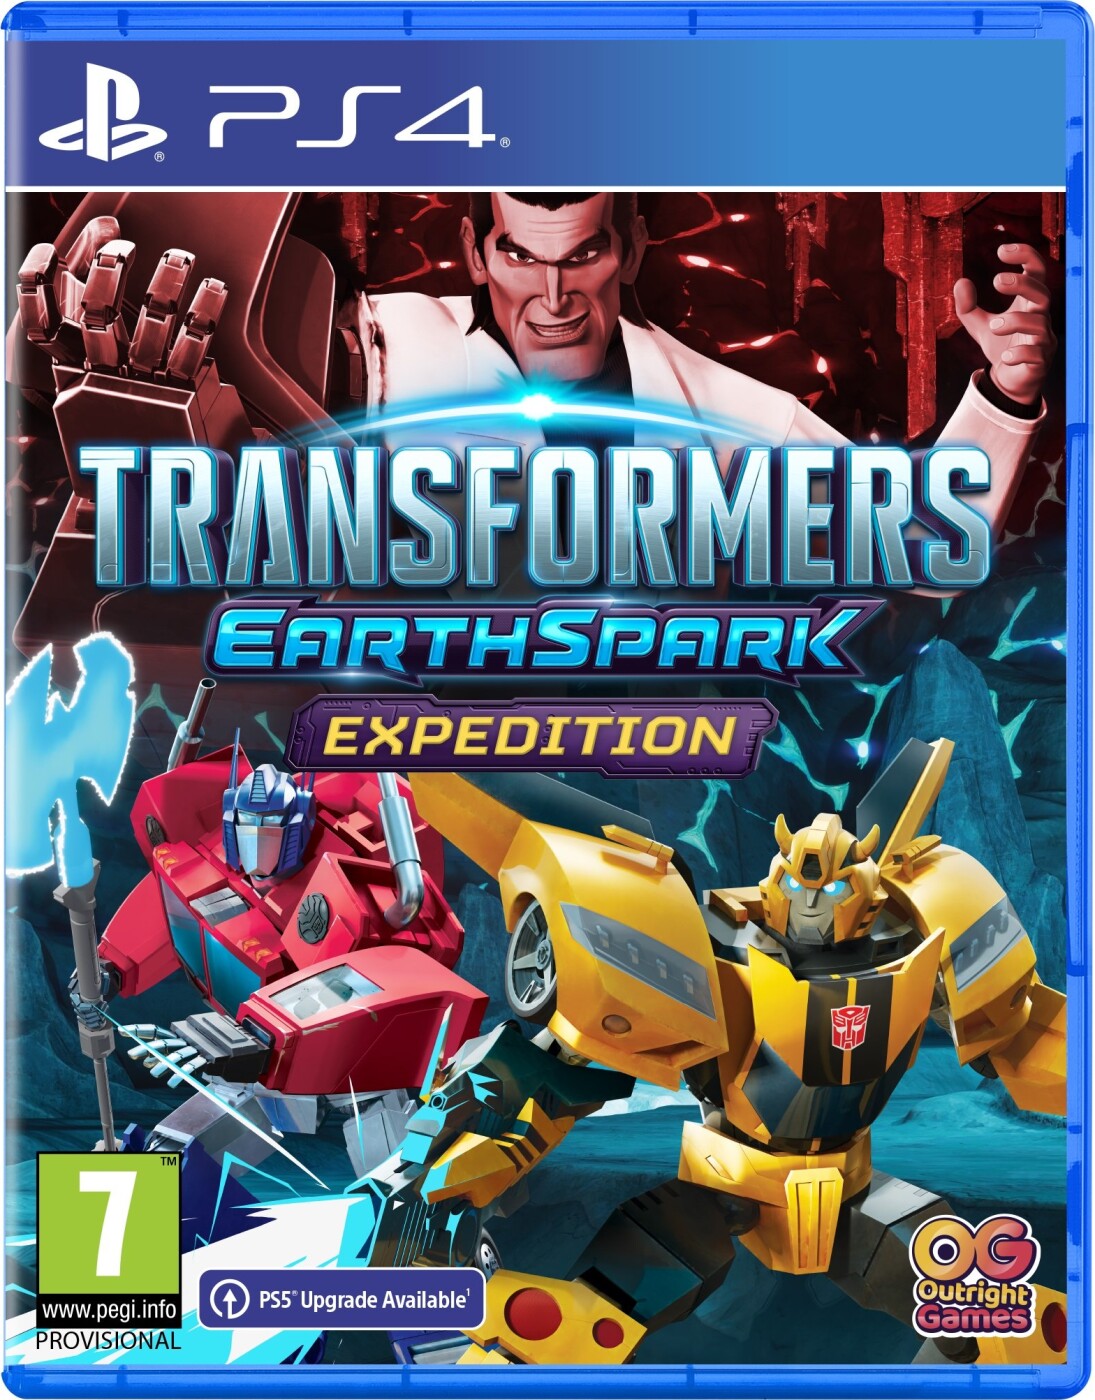 Transformers Earthspark - Expedition - PS4